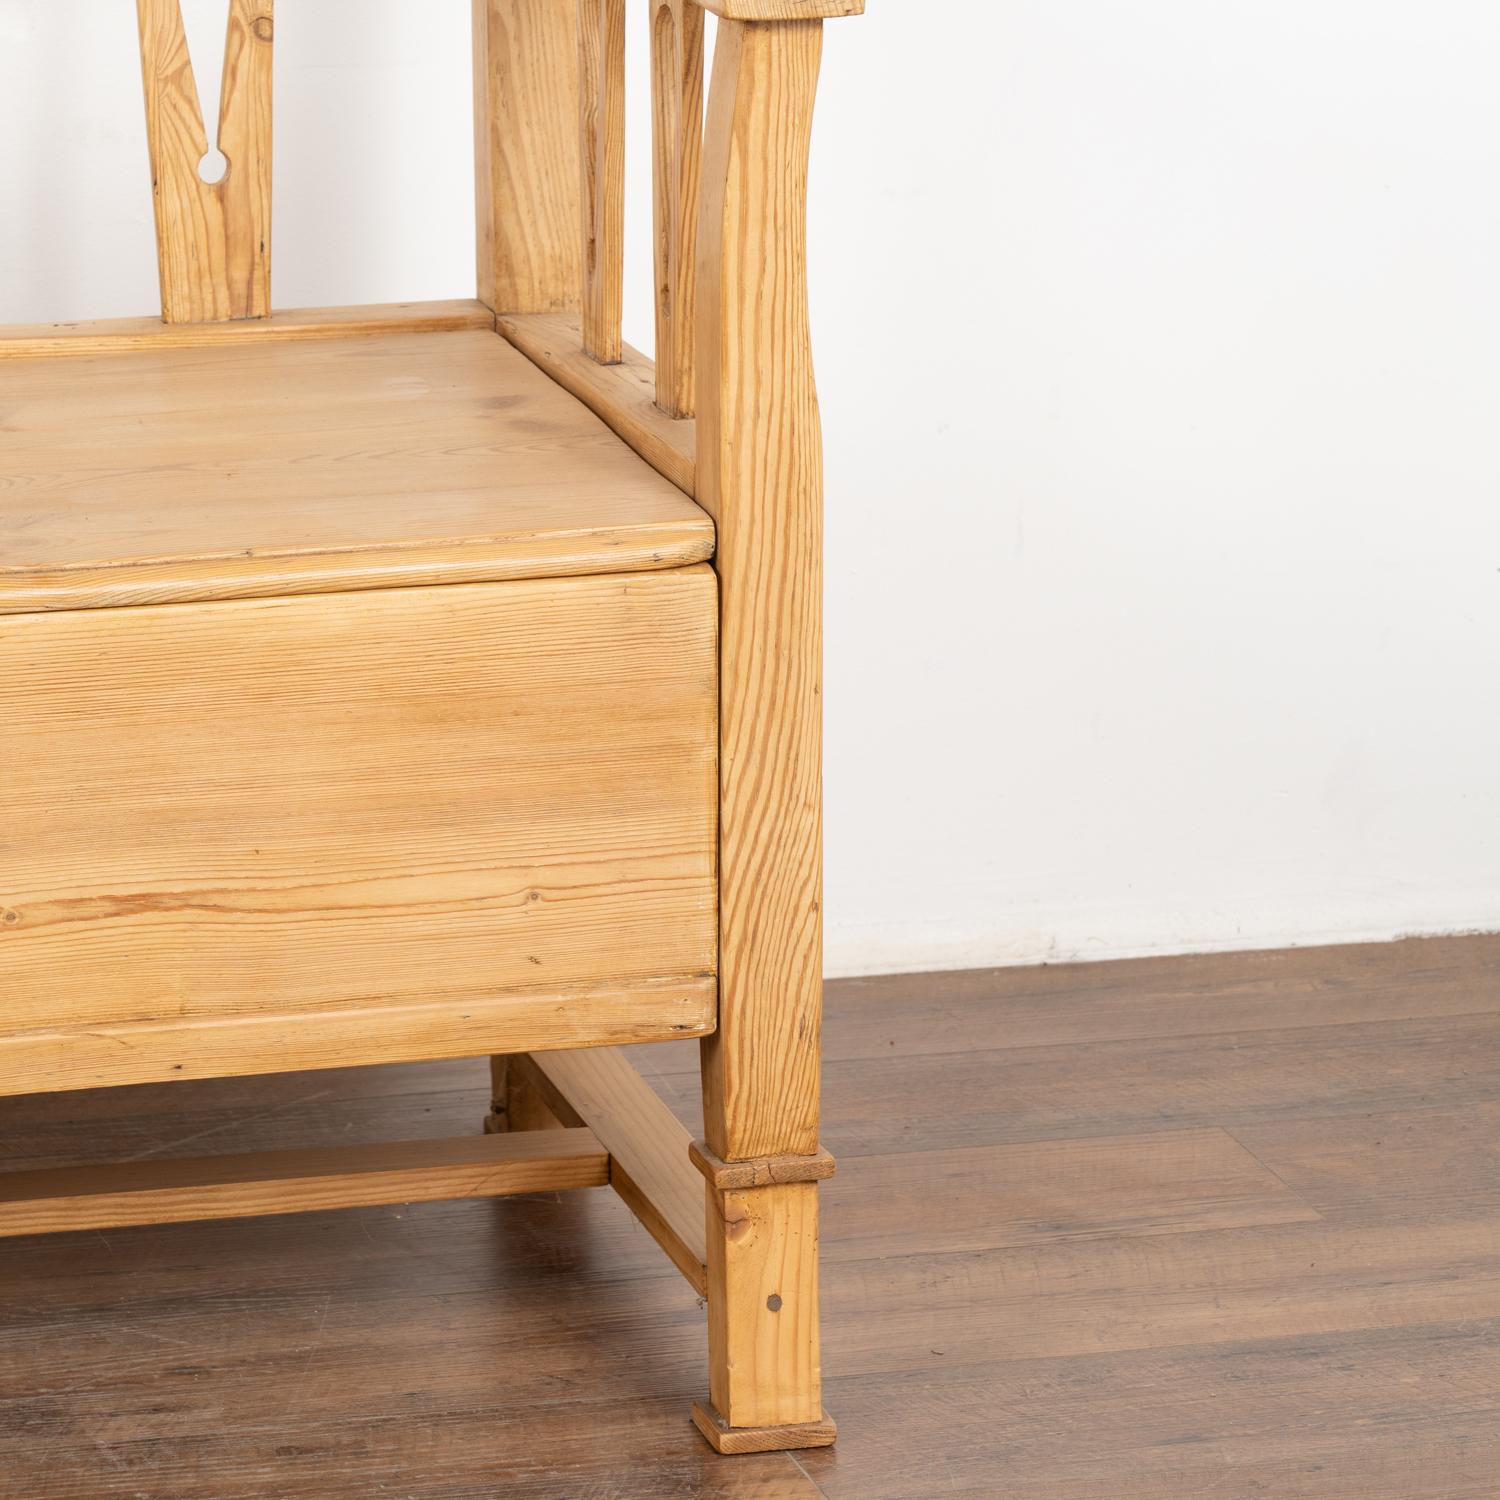 Pine Bench With Storage, Sweden circa 1880 For Sale 5